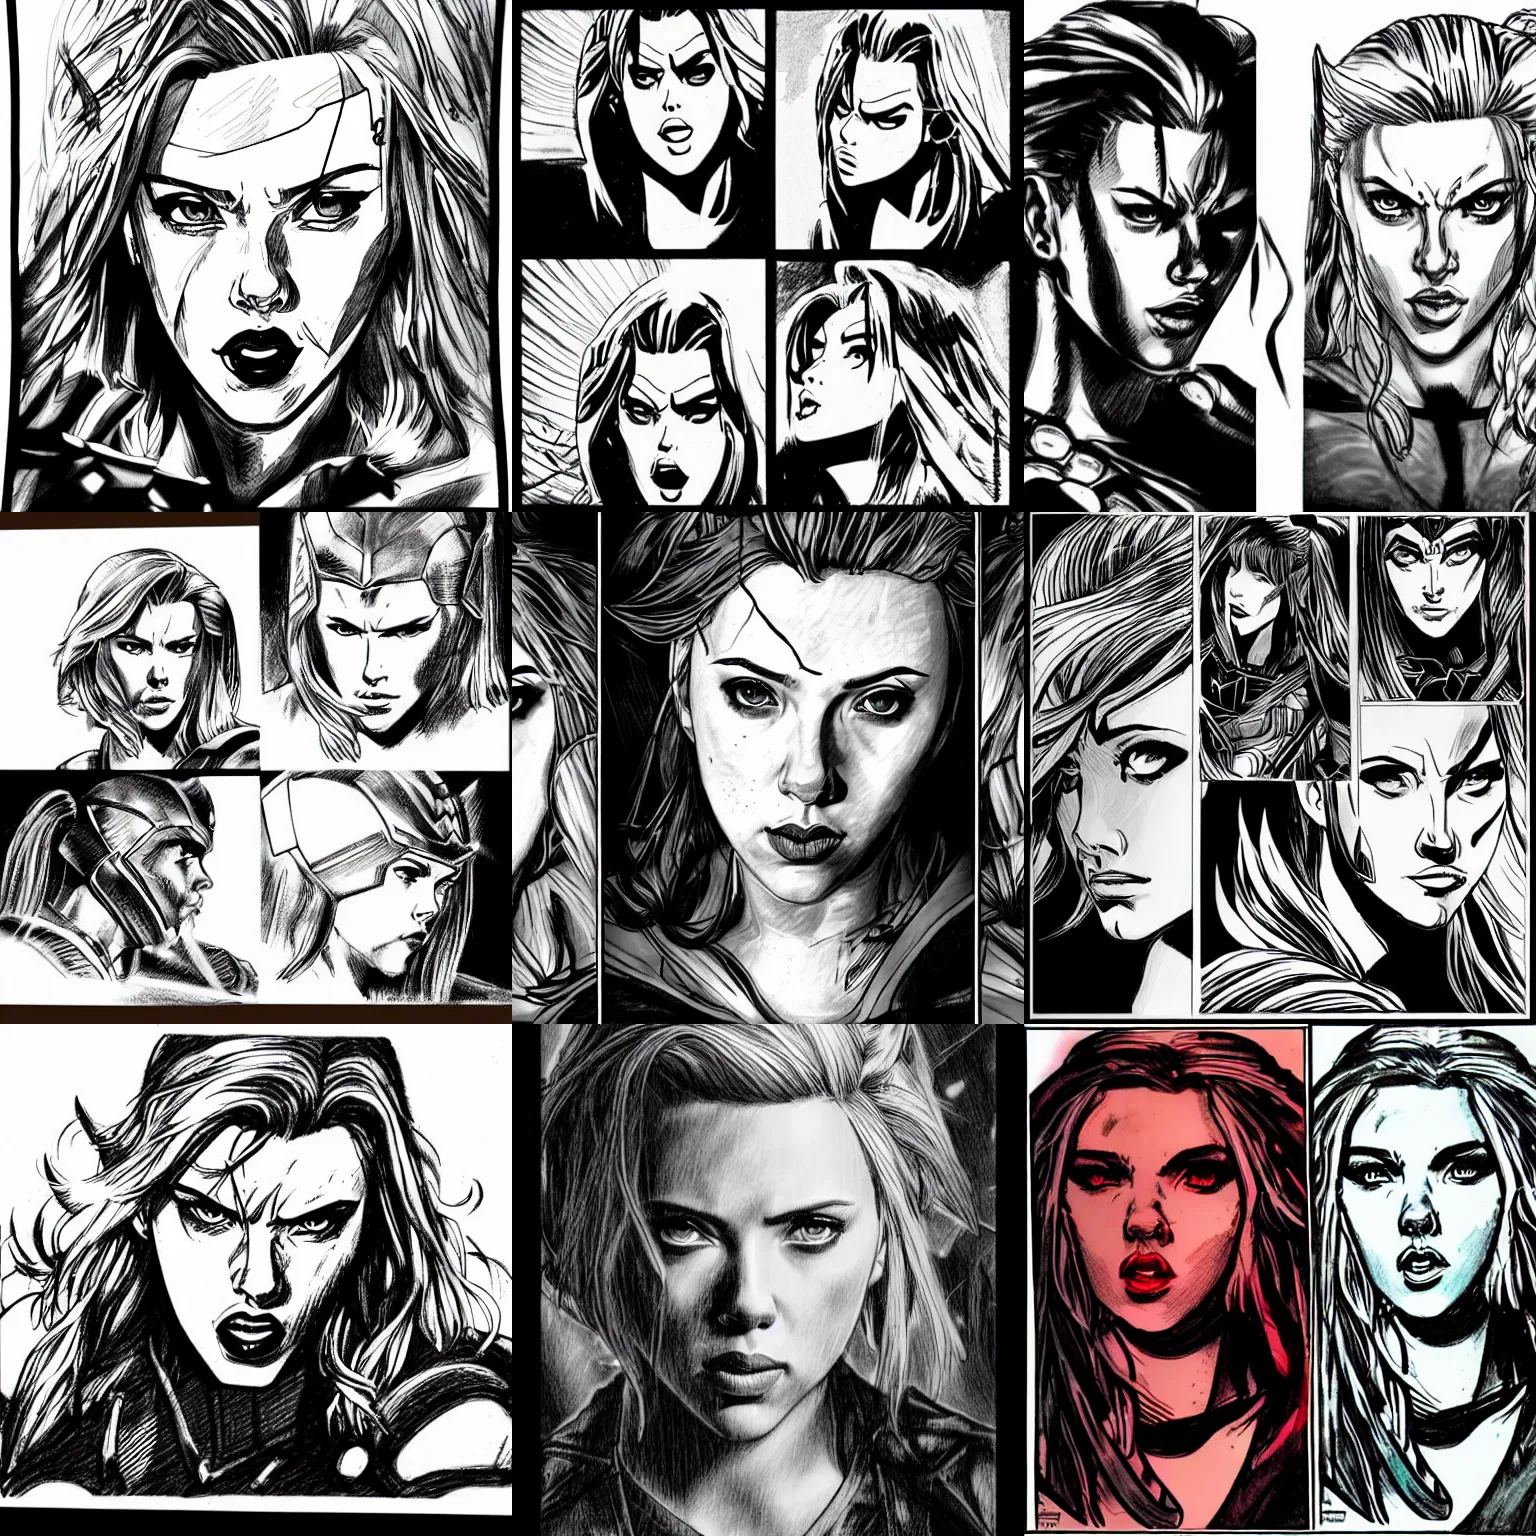 Prompt: 3 panels of scarlett johansson with angry expression as thor, dramatic lighting, anime style, pencil and ink manga drawing,